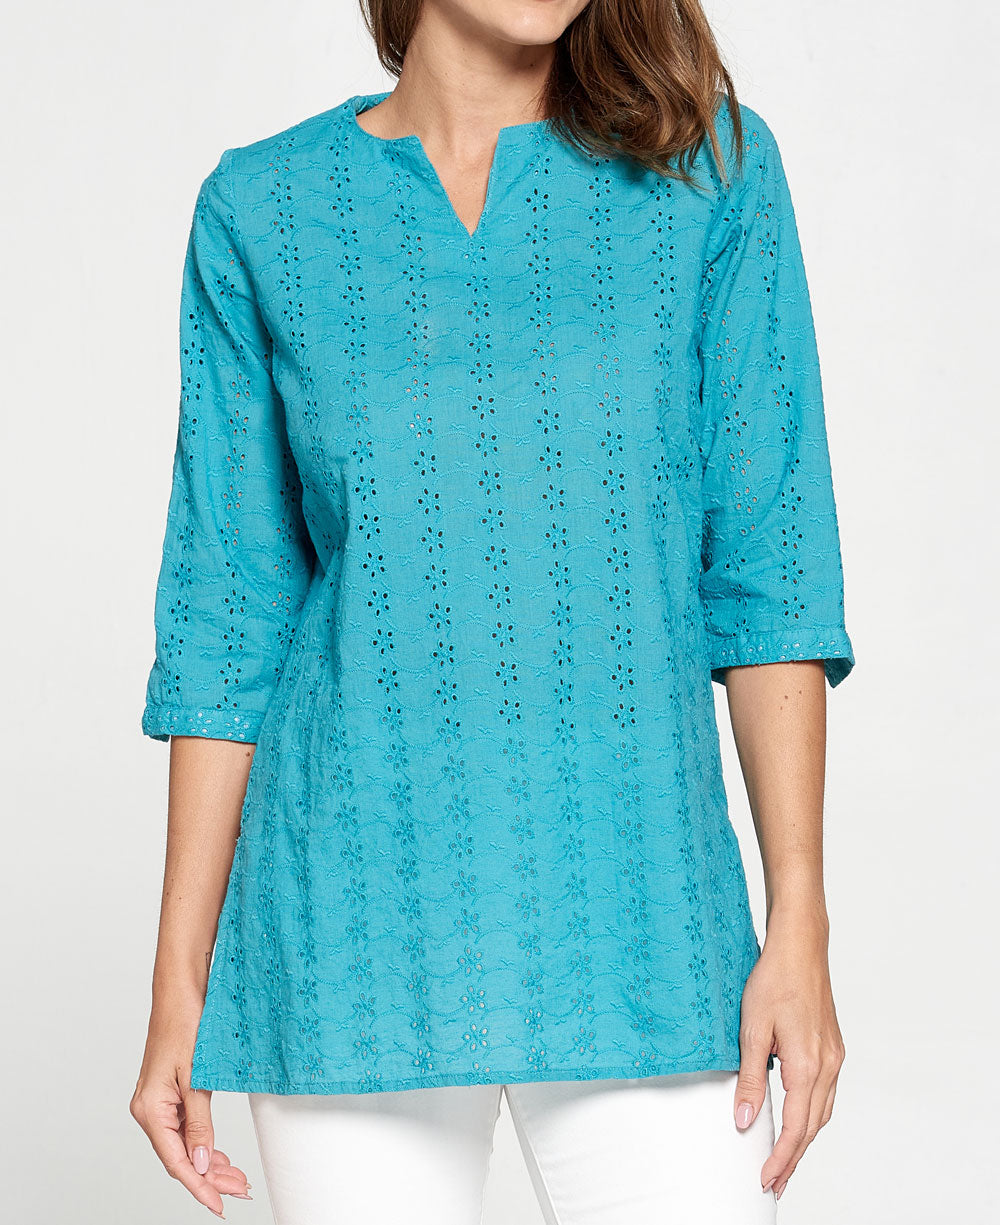 Embroidered Eyelet Turquoise Cotton Tunic Top – Cultural Elements